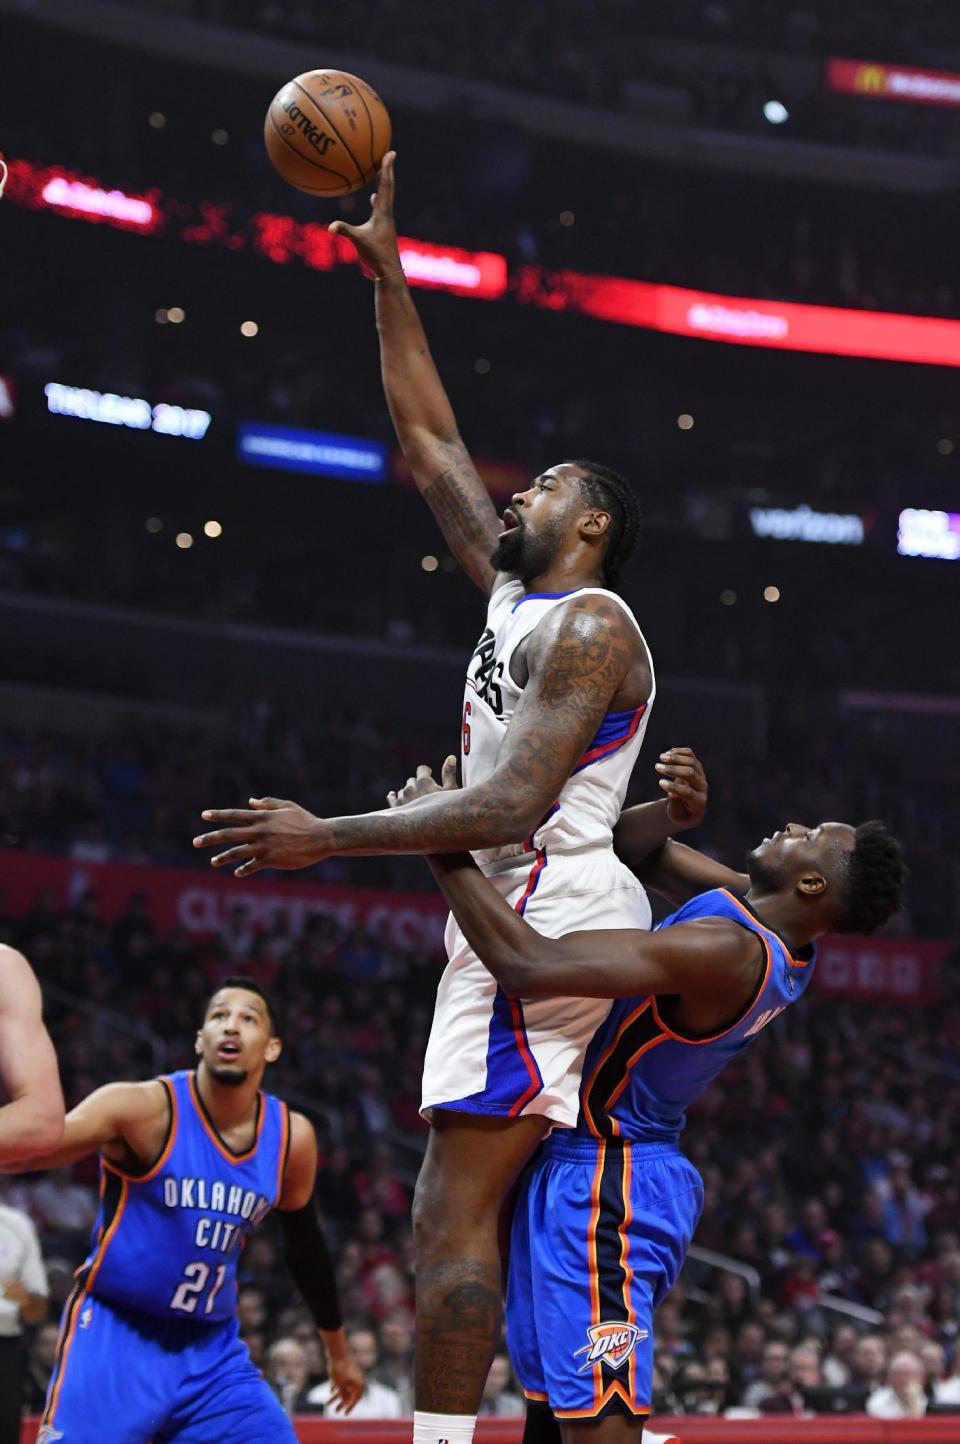 Los Angeles Clippers center DeAndre Jordan, center, shoots as Oklahoma City Thunder forward Jerami Grant, right, defends a long with forward Andre Roberson during the first half of an NBA basketball game, Monday, Jan. 16, 2017, in Los Angeles. (AP Photo/Mark J. Terrill)